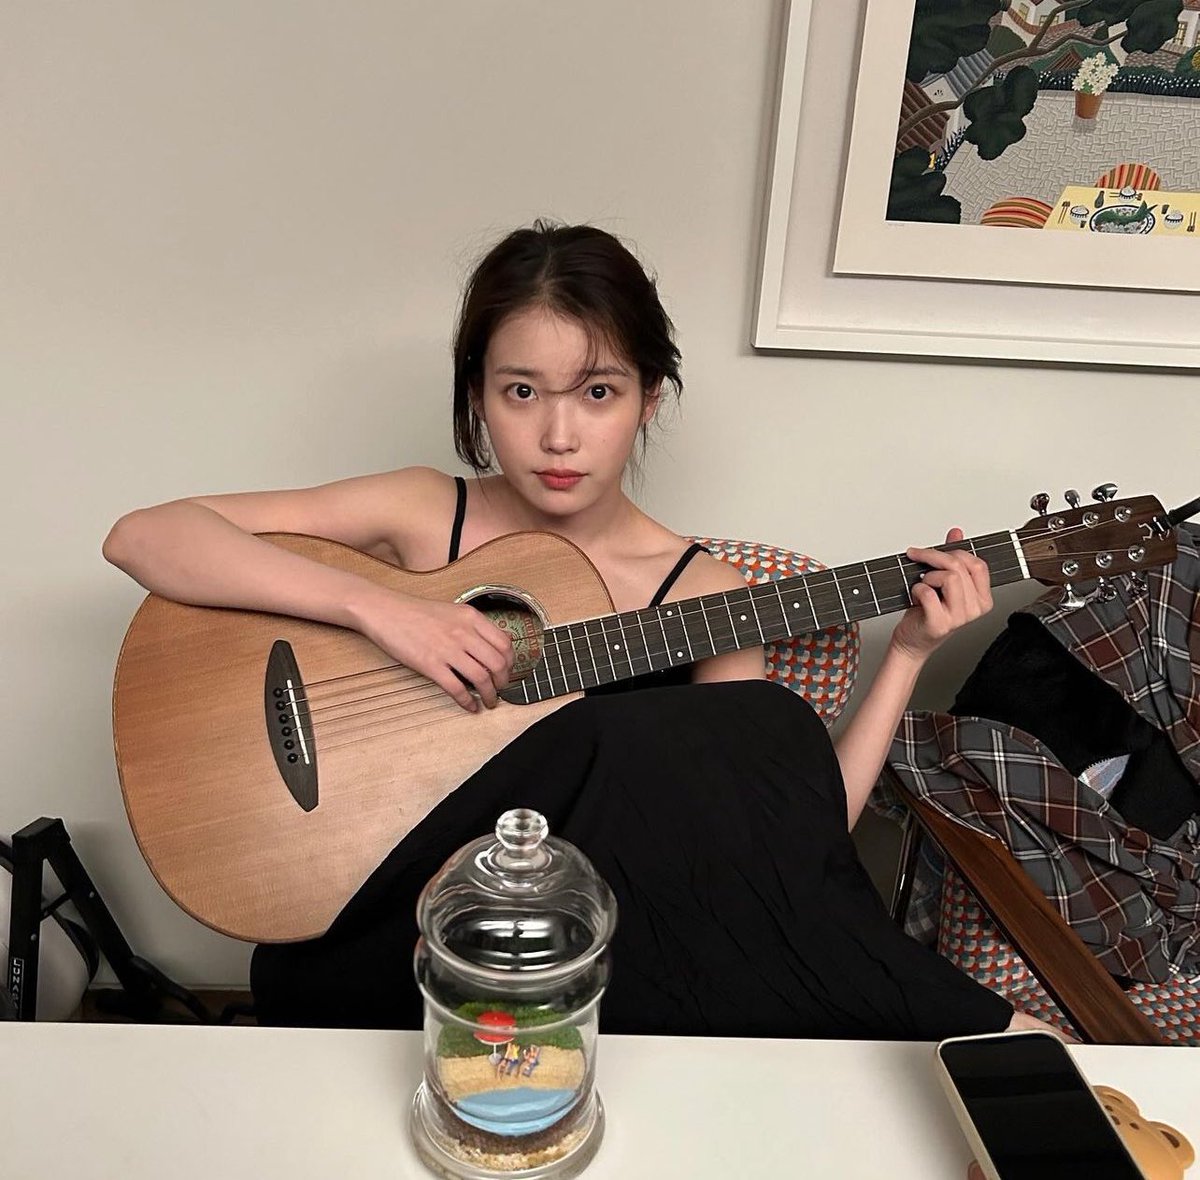 no bcs IU holding a guitar????? This saved our lives tbh